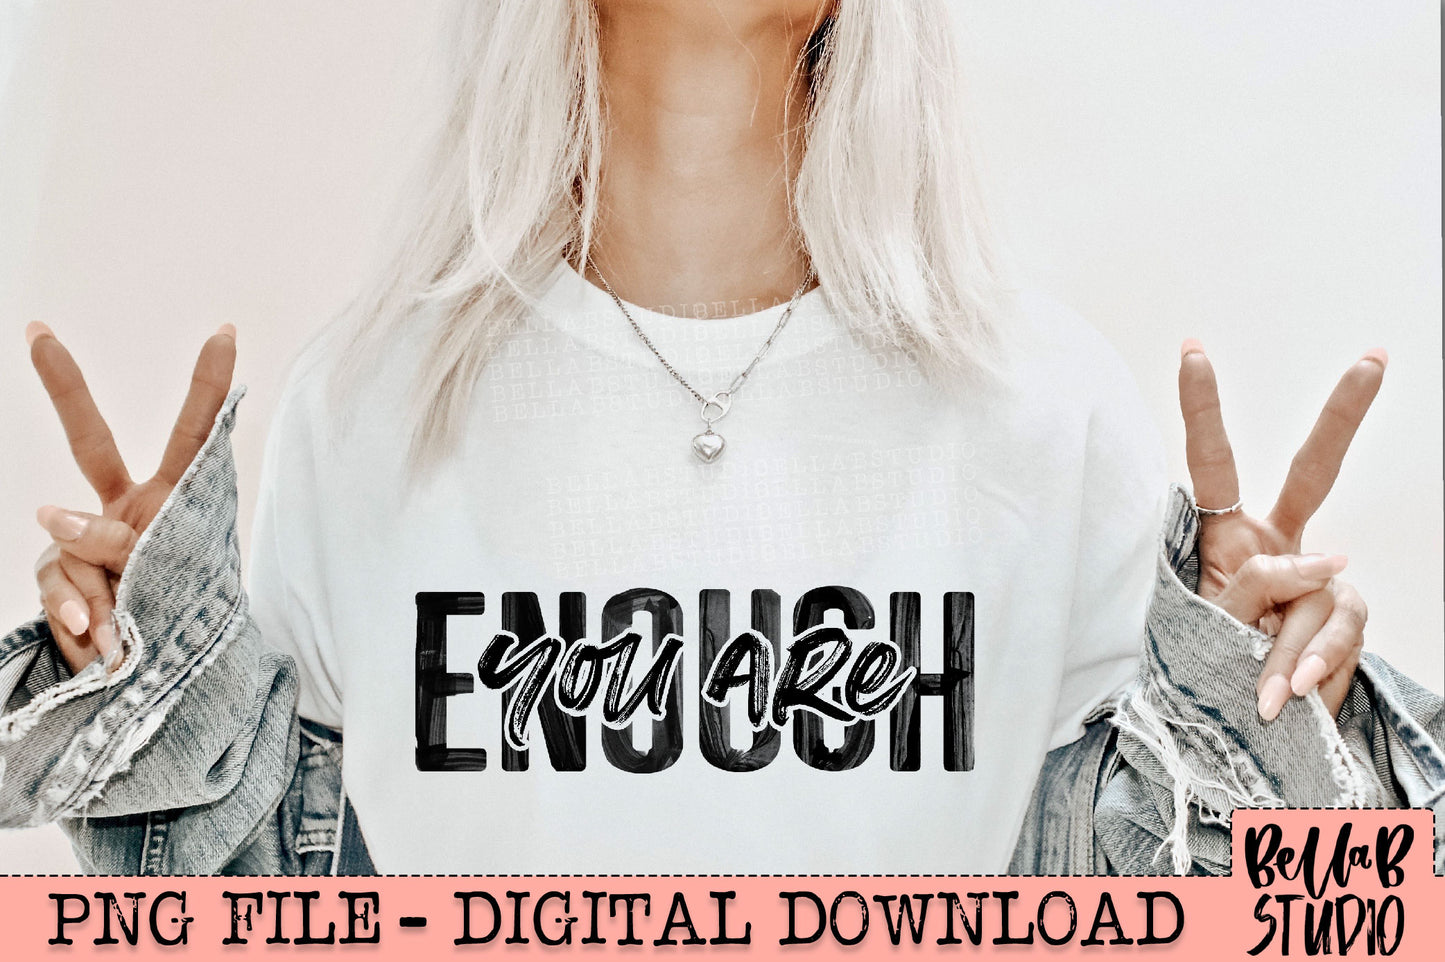 You Are Enough PNG Design